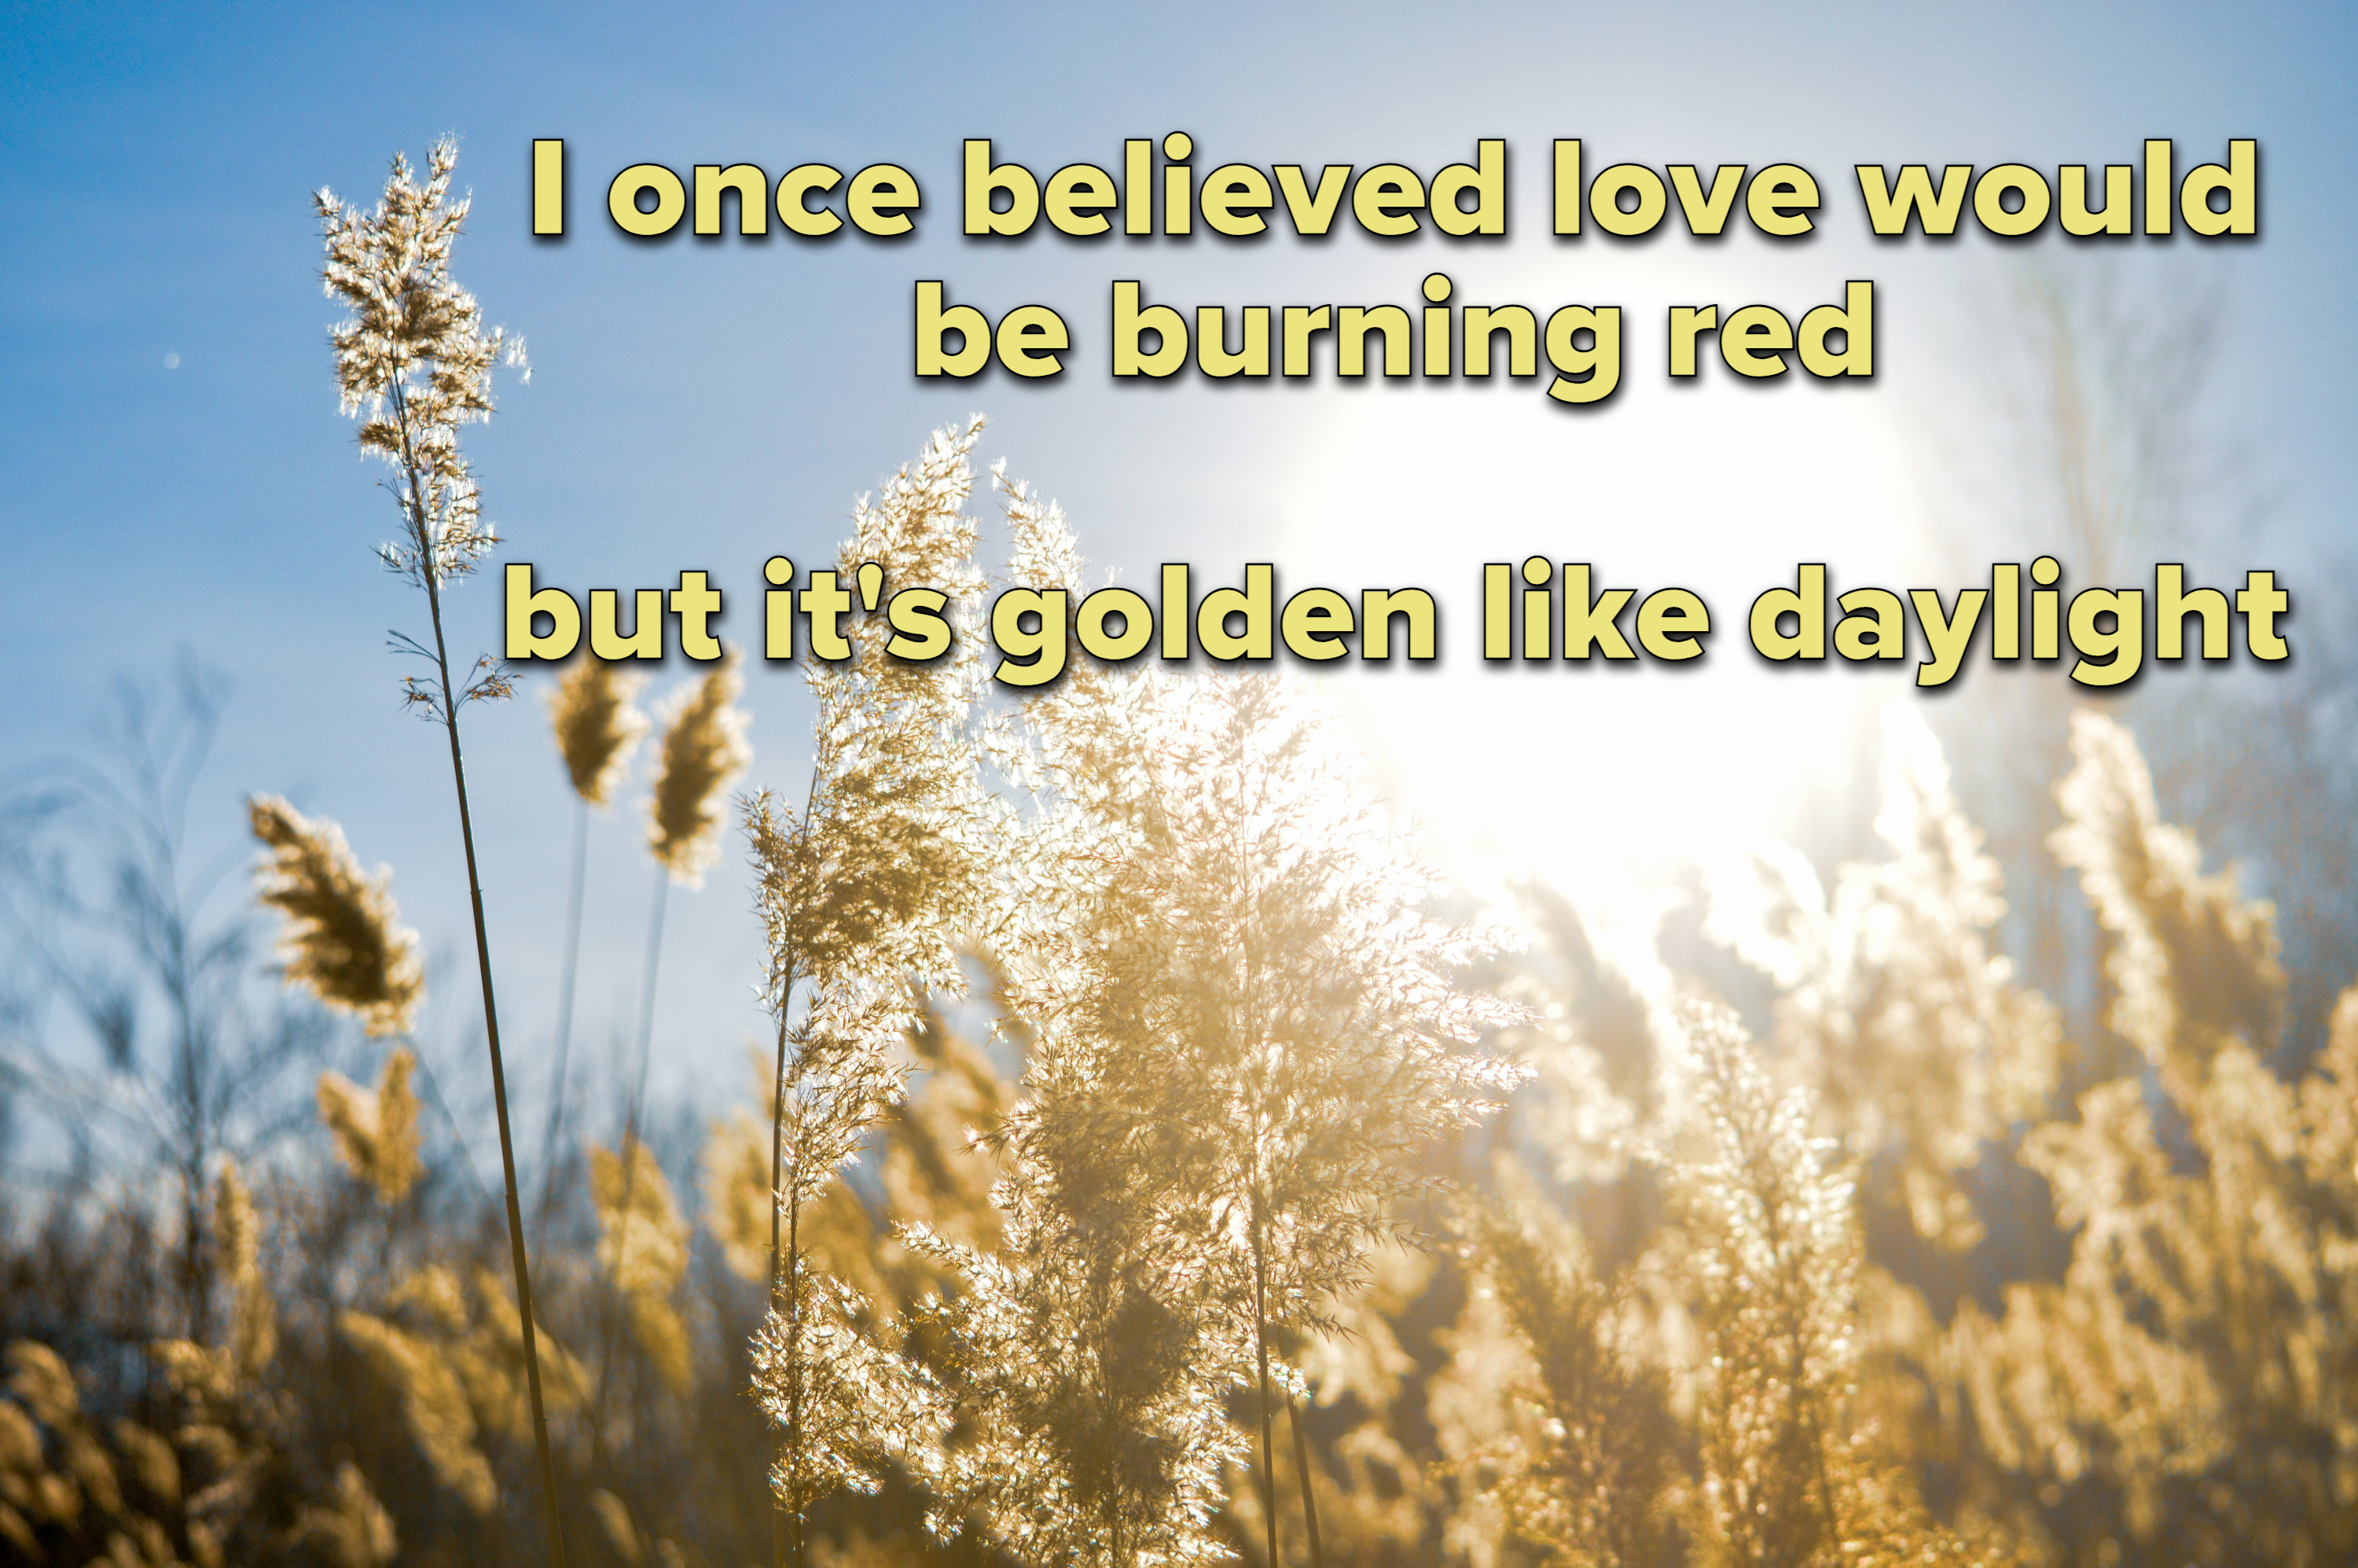 Photo of a wheat field with lyrics from &quot;Daylight&quot; by Taylor Swift on top